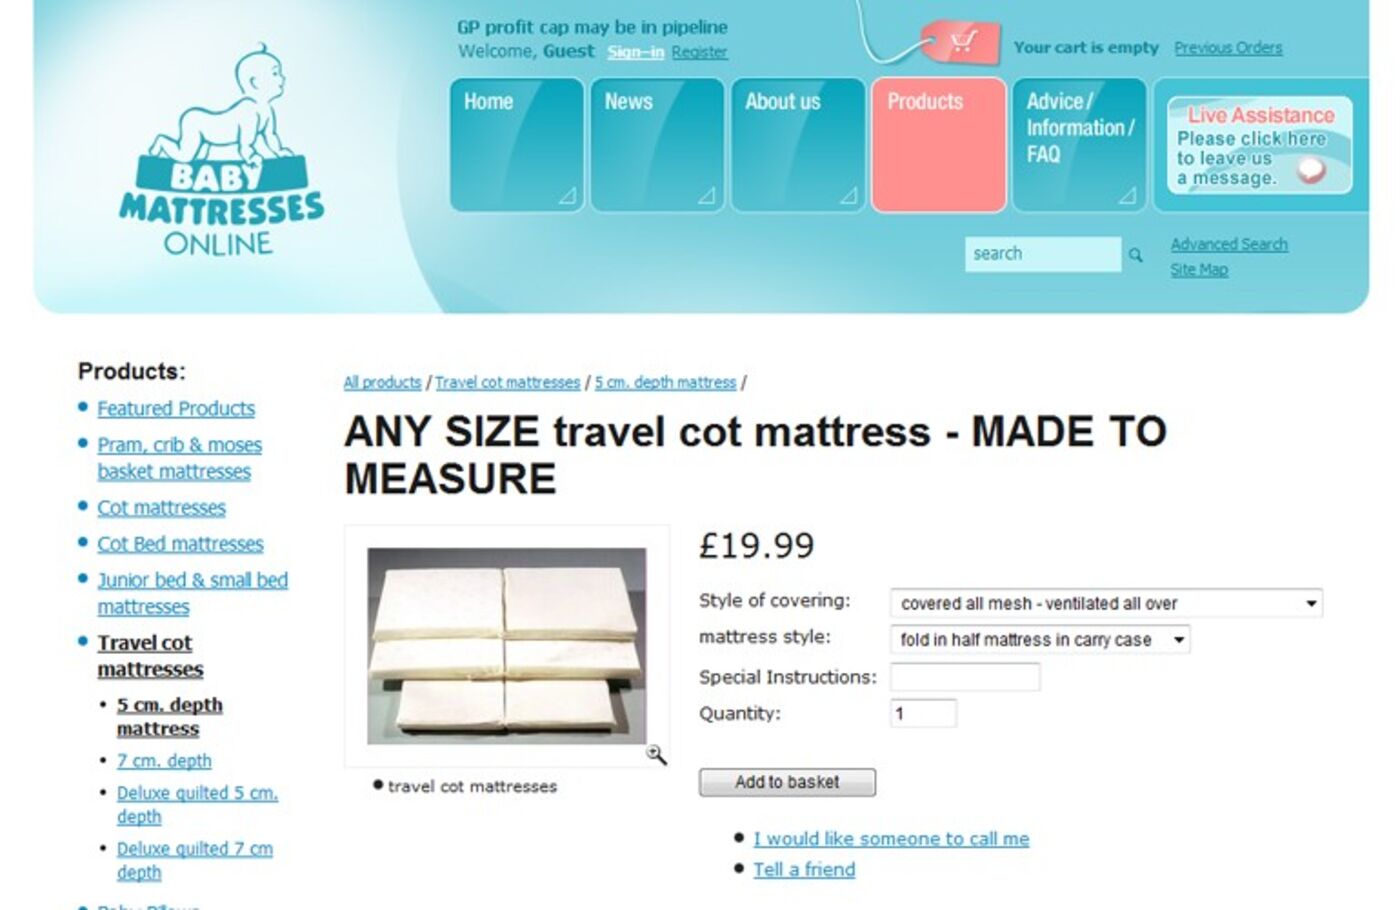 Baby Mattresses Online (2006) Product